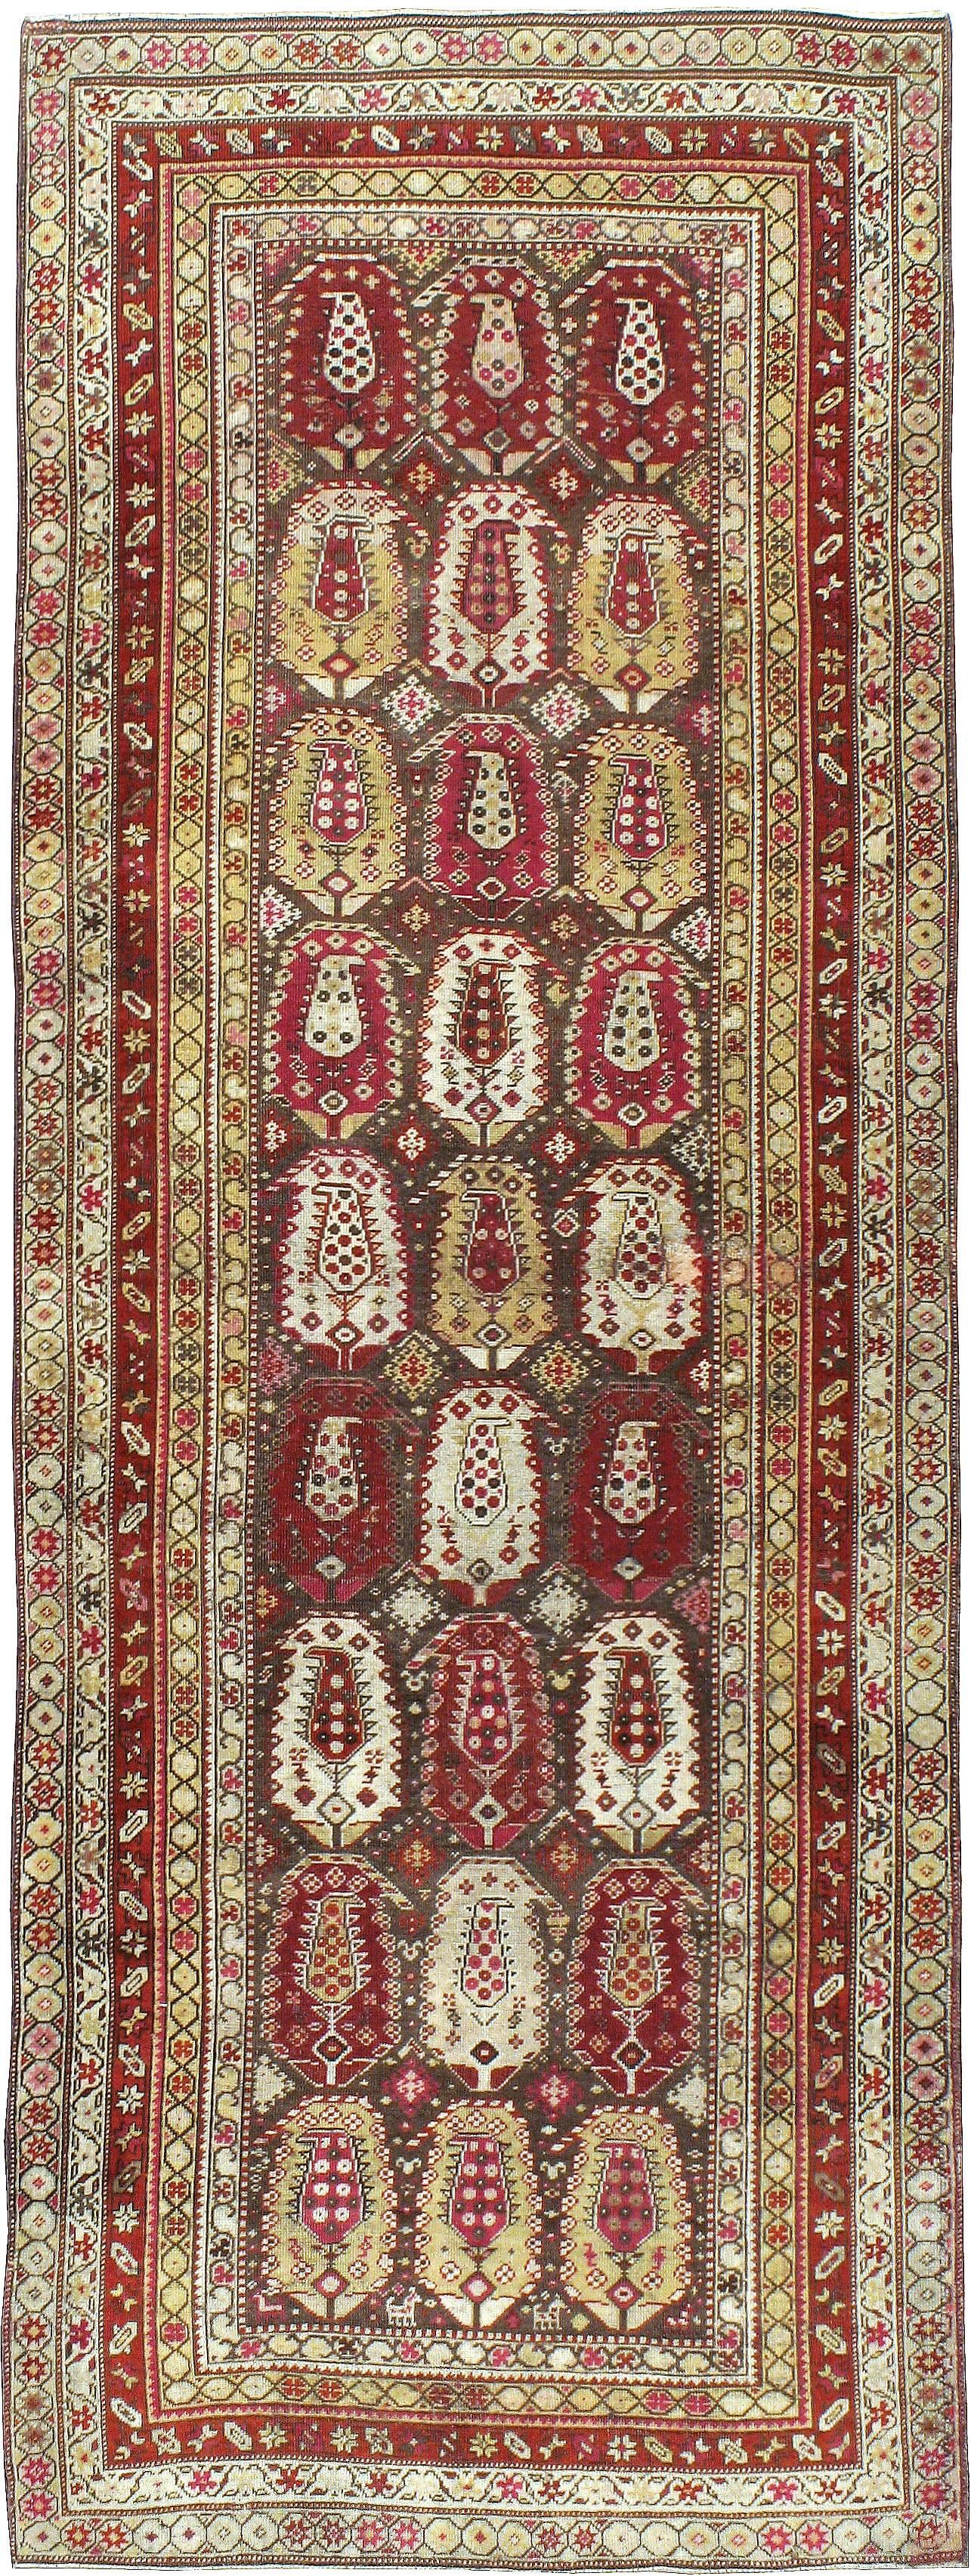 An antique Persian North West rug from the first quarter of the 20th century.